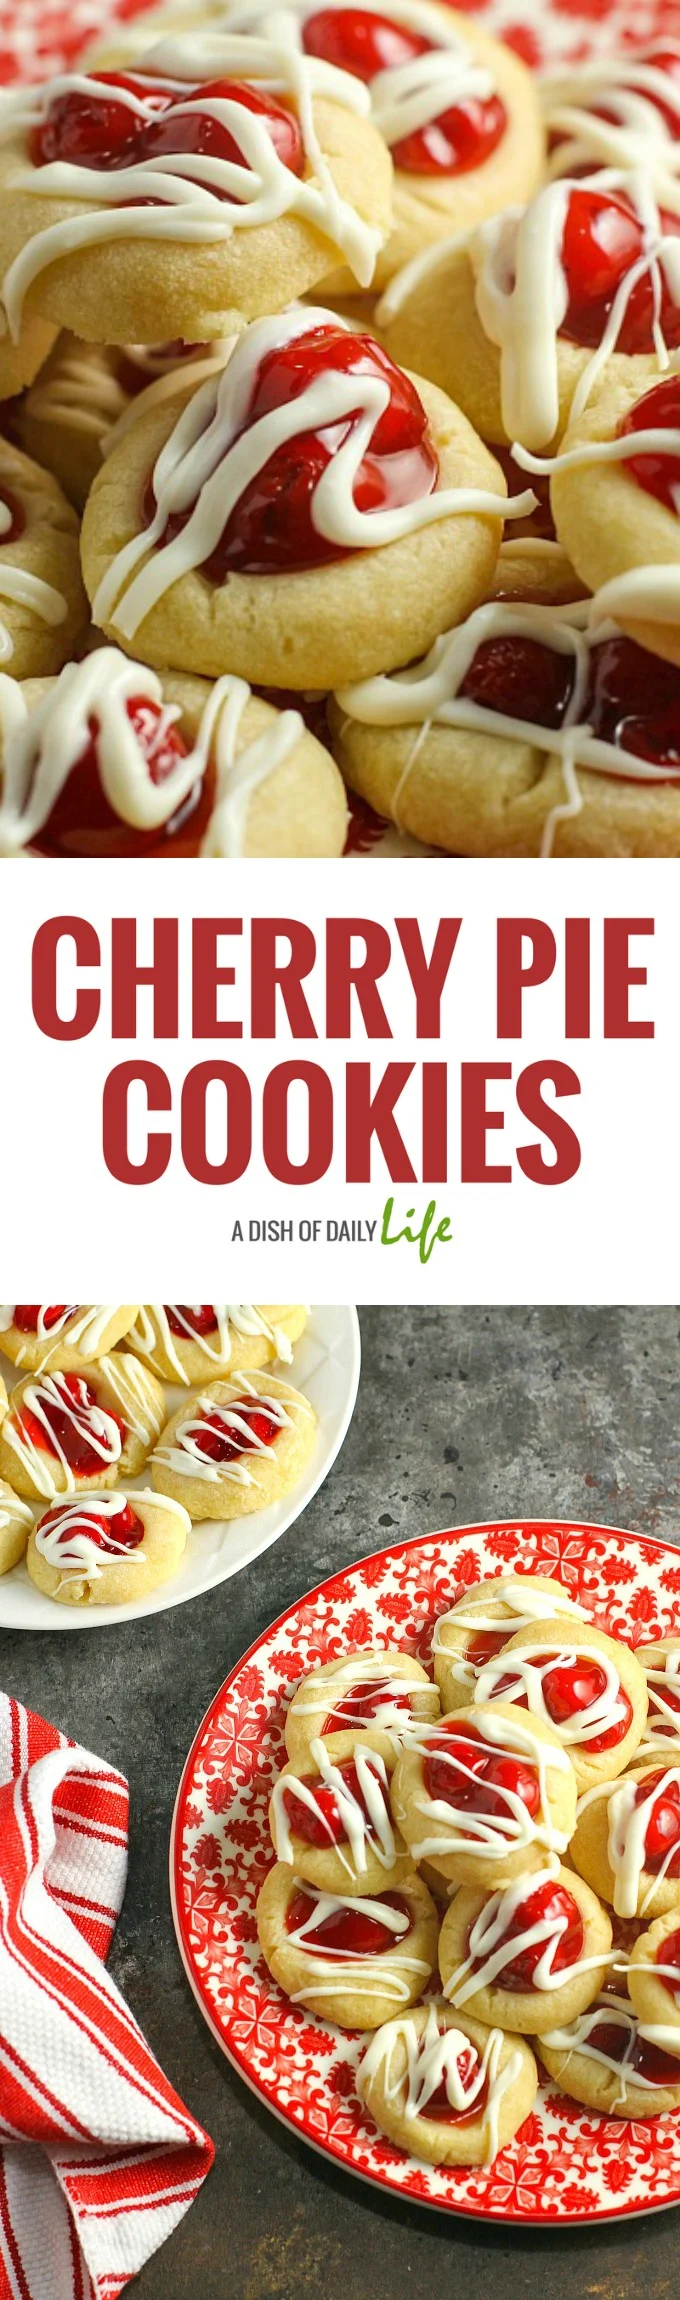 These pretty (and delicious!) shortbread style Cherry Pie cookies are perfect for holiday cookie exchanges or special occasions! Your guests will never guess how easy they are to make!